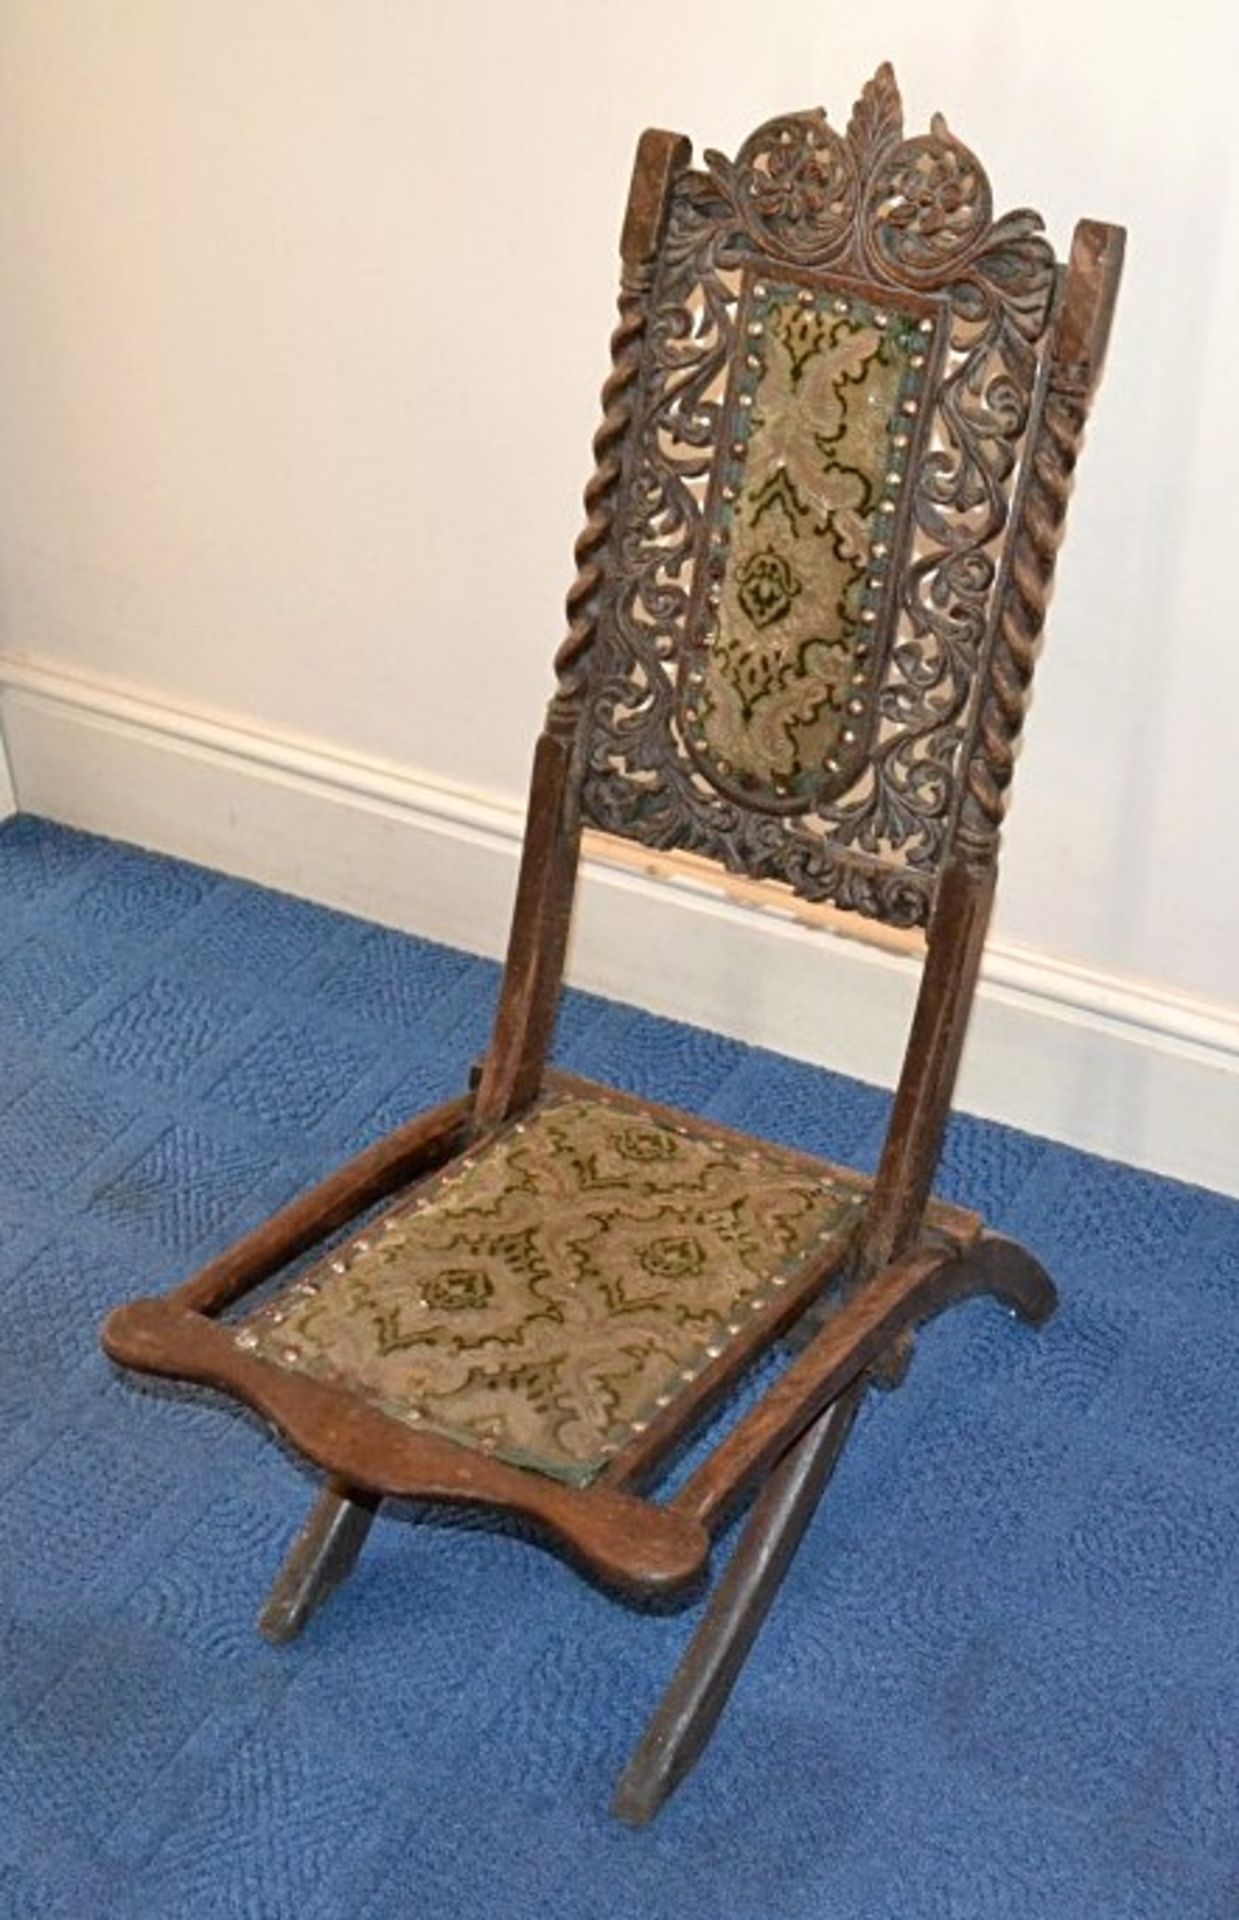 1 x Antique Victorian Upholstered Folding Chair - From A Grade II Listed Hall In Good Original - Image 2 of 7